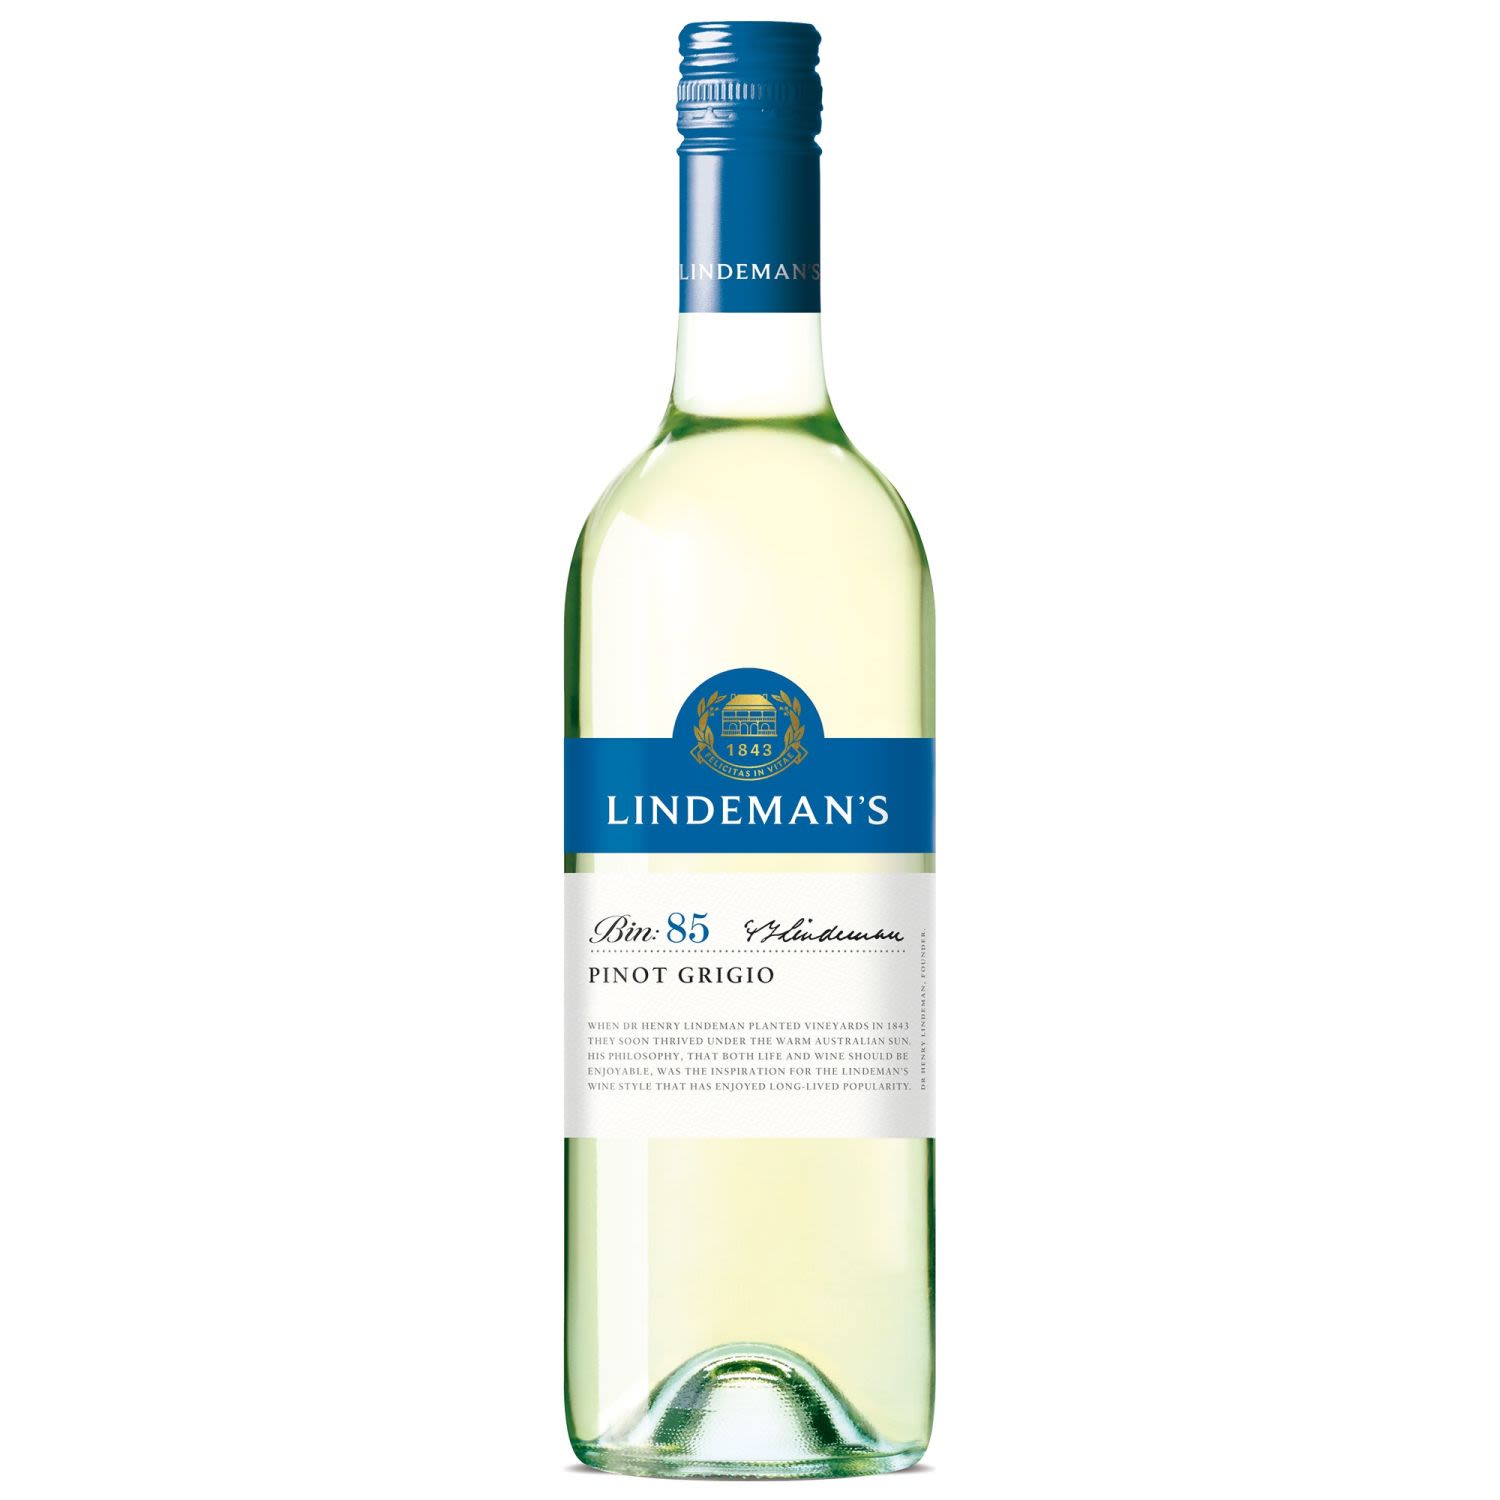 A lovely blend of floral jasmine & orange blossom with ripe apple & pear skins leap from the glass. Crunchy apple & pear flavours fill the palate, finishing with a clean & lengthy finish.<br /> <br />Alcohol Volume: 12.00%<br /><br />Pack Format: Bottle<br /><br />Standard Drinks: 7.1</br /><br />Pack Type: Bottle<br /><br />Country of Origin: Australia<br /><br />Region: South Eastern Australia<br /><br />Vintage: Non Vintage<br />